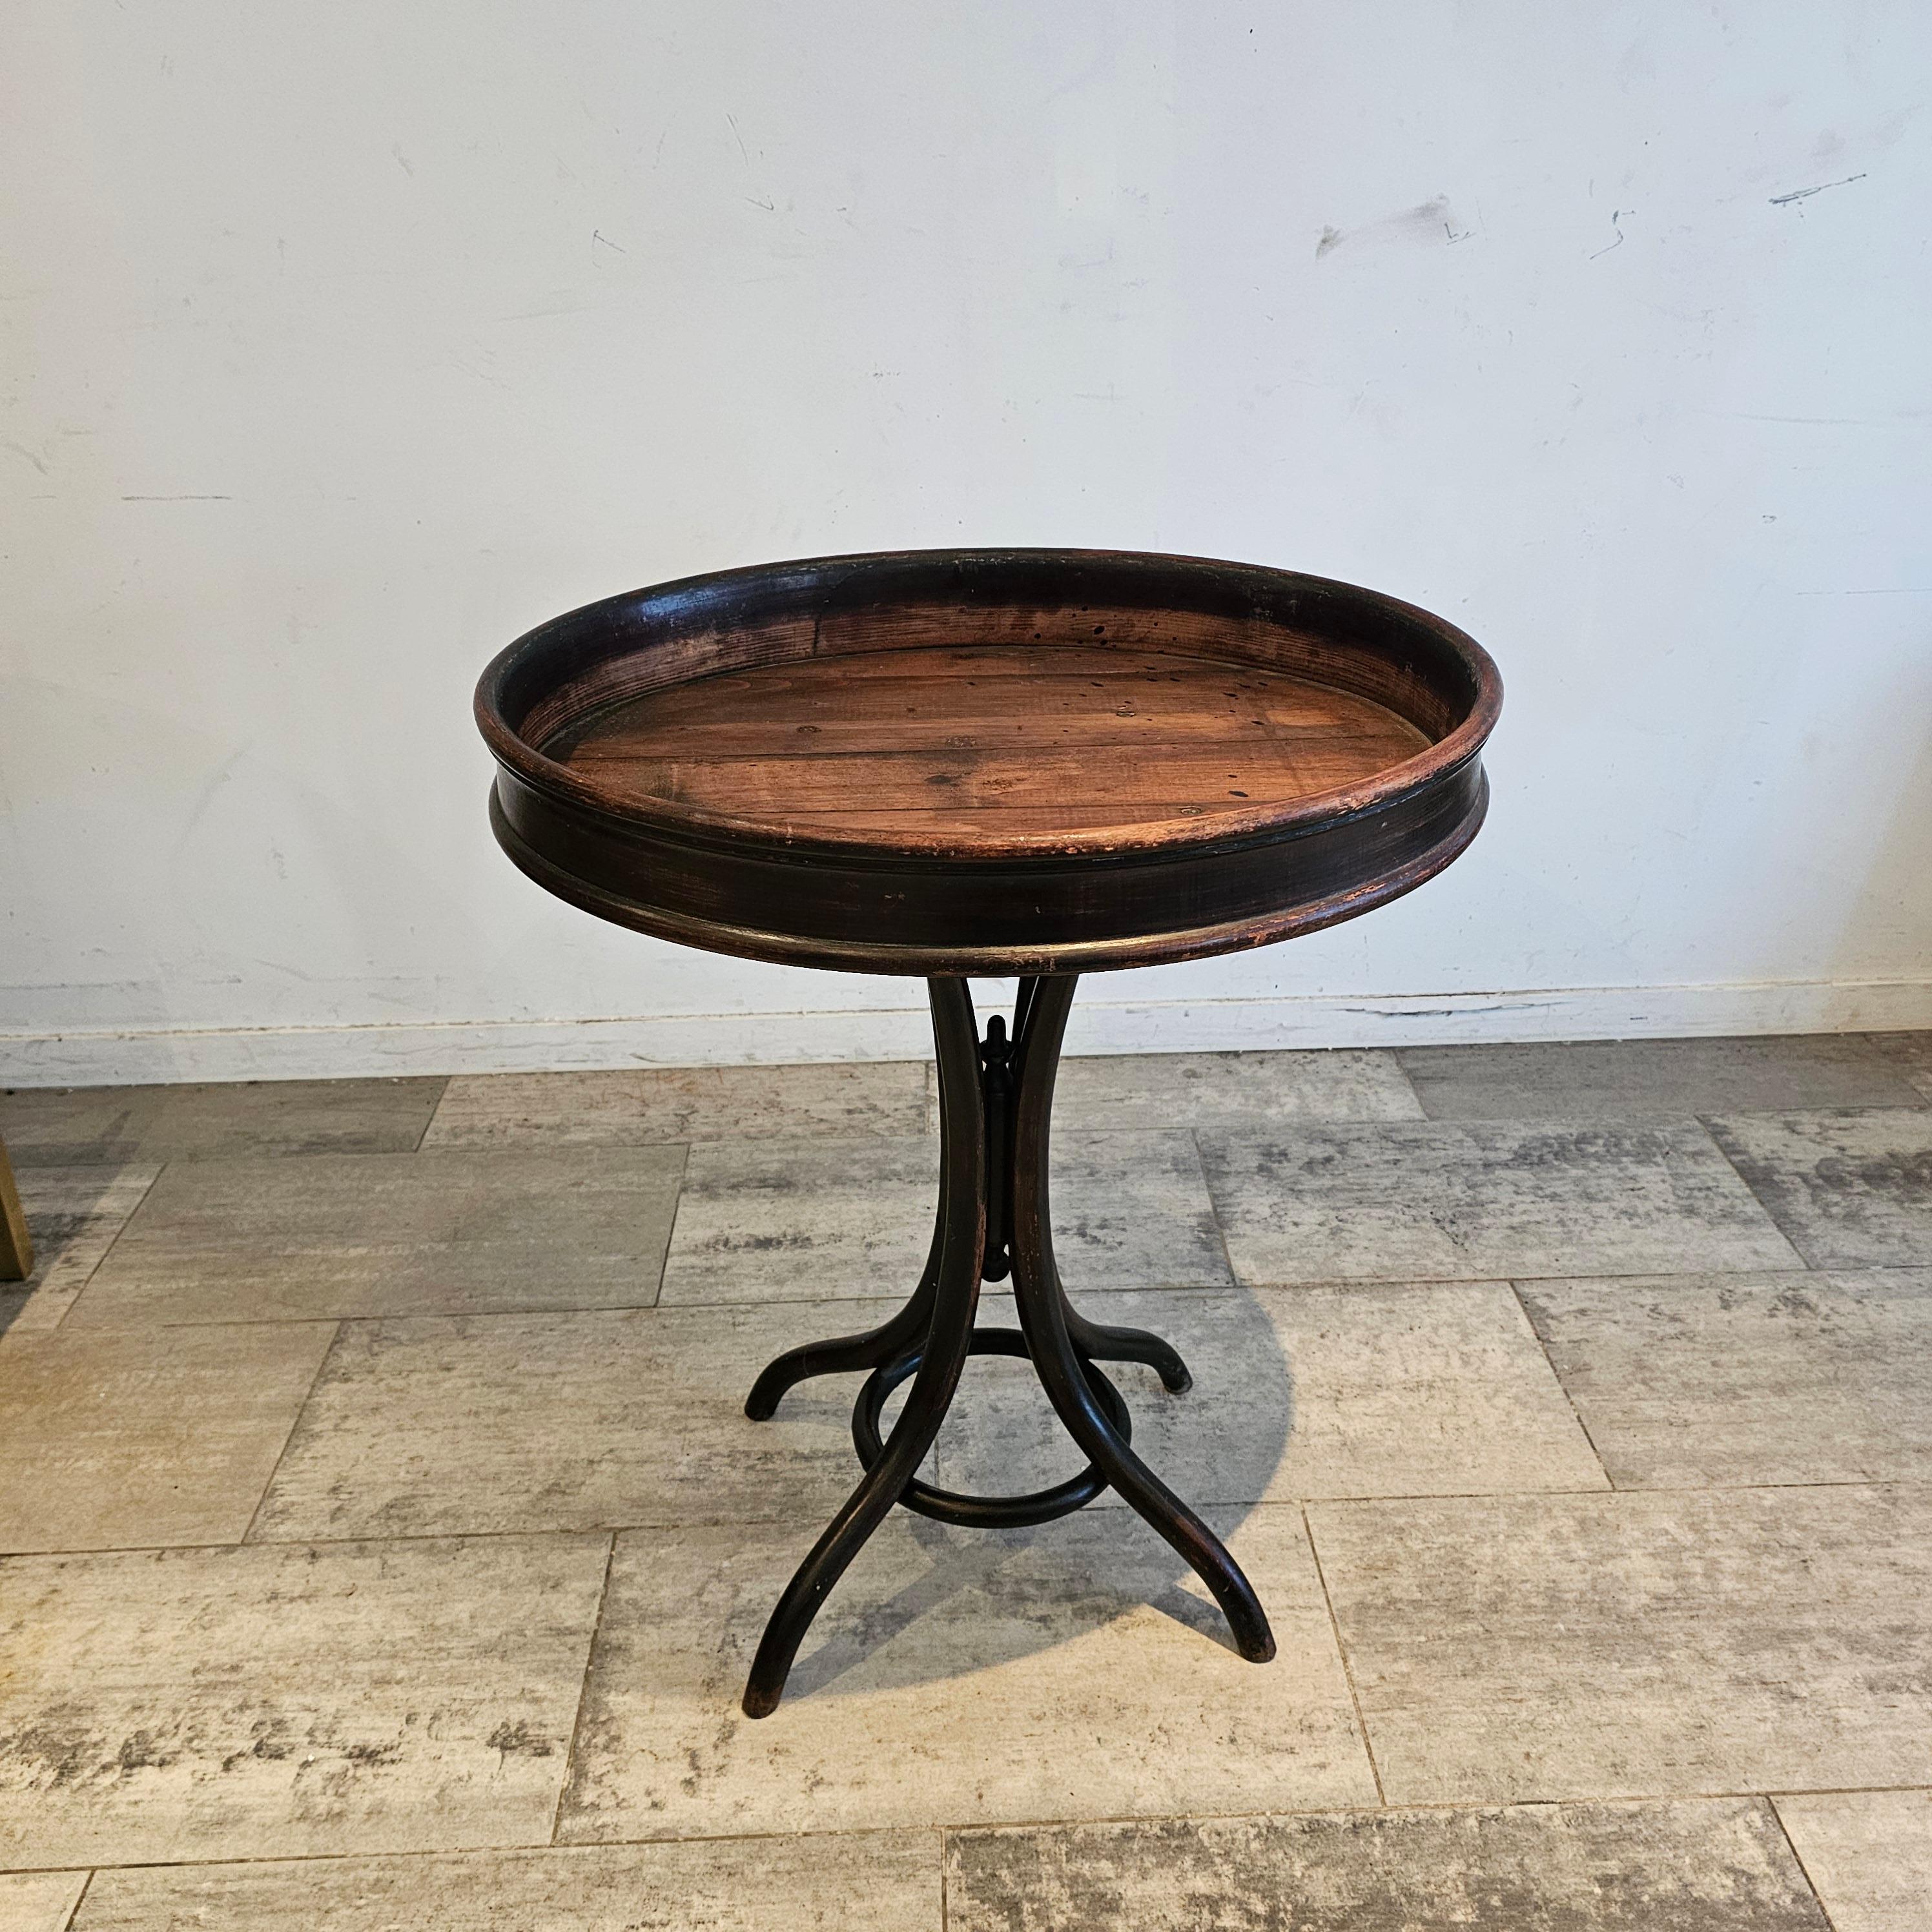 Rare, Wooden Flower Table from Jacob and Josef Khon, jardinaire